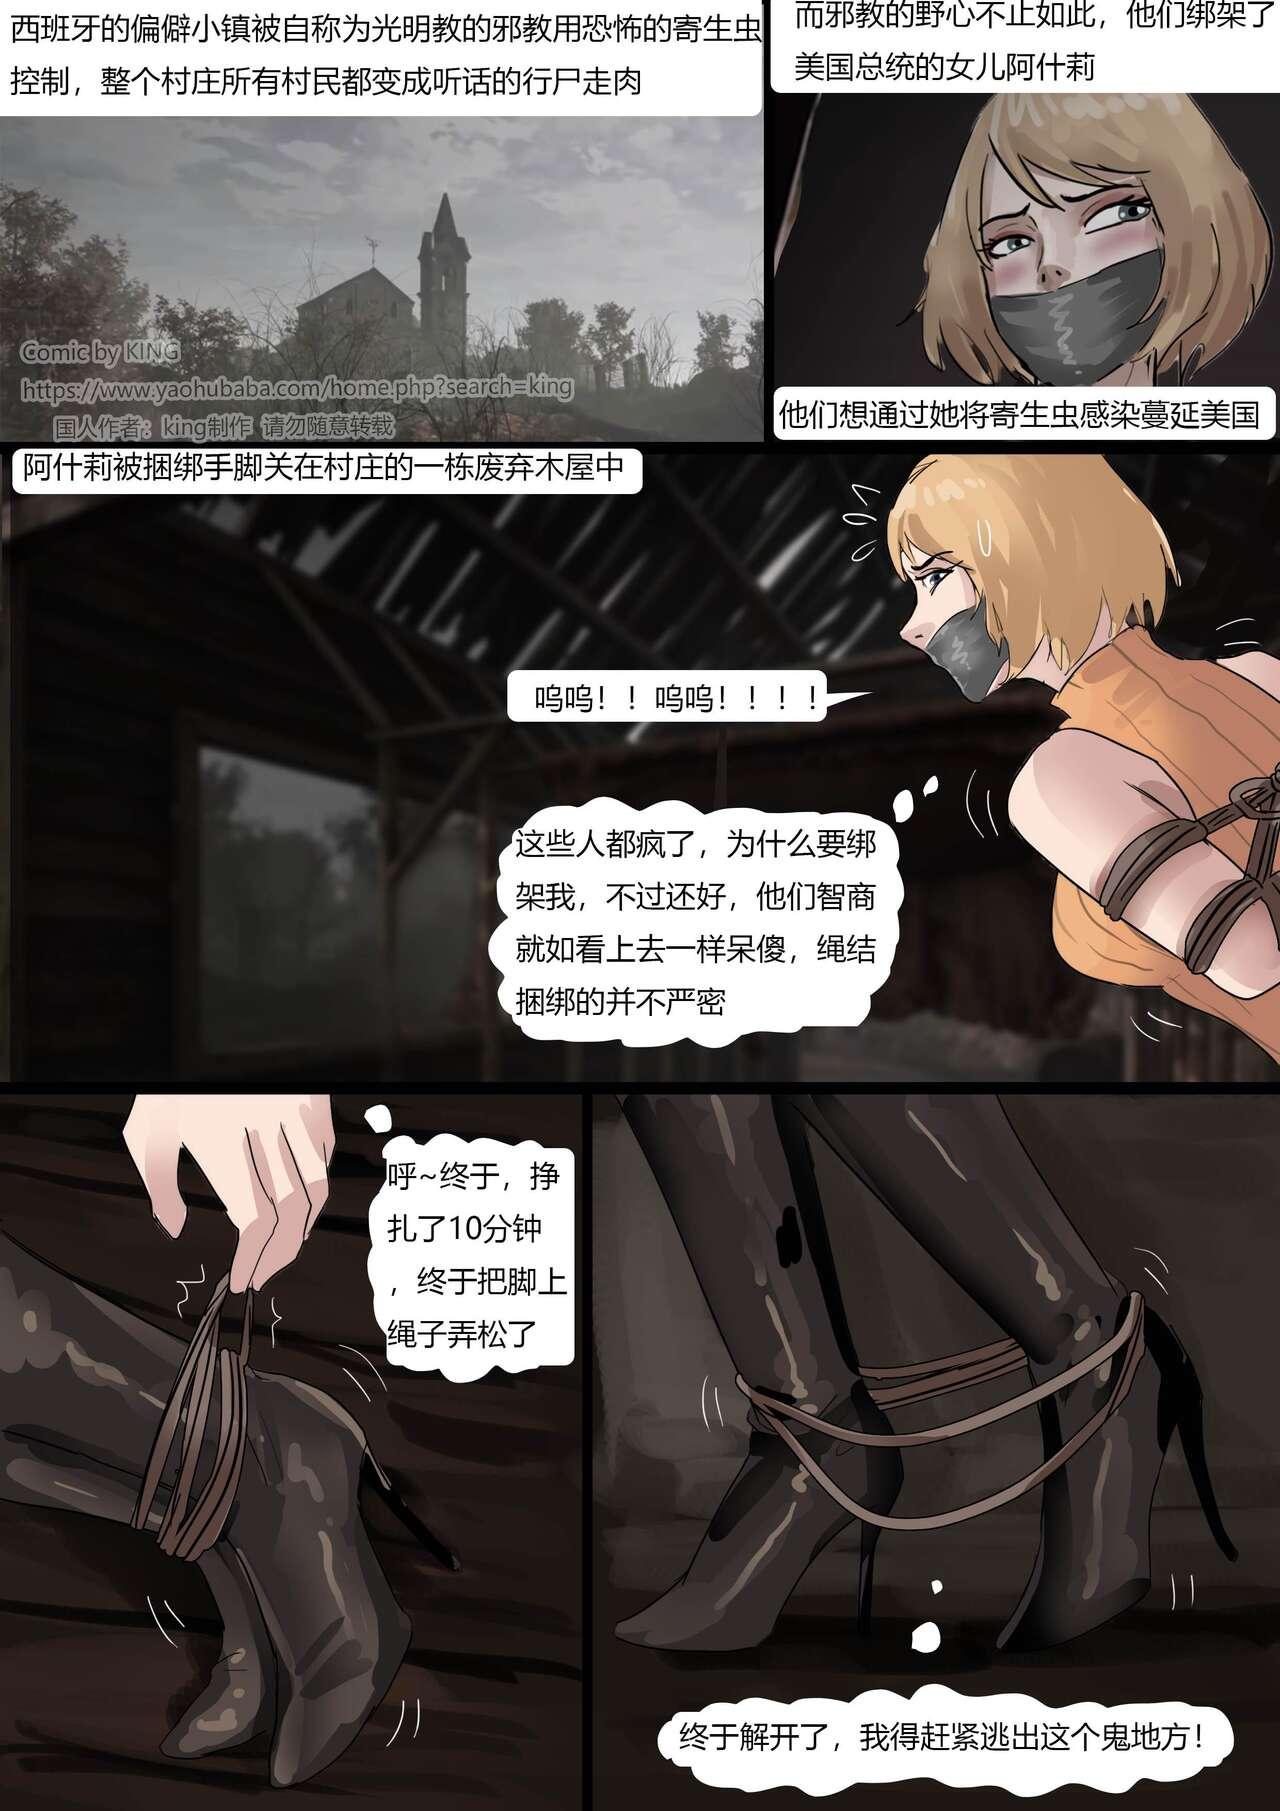 Shoes [King] Resident Evil 4 Remastered -- Two Beauties In Distress - Resident evil | biohazard  - Page 2